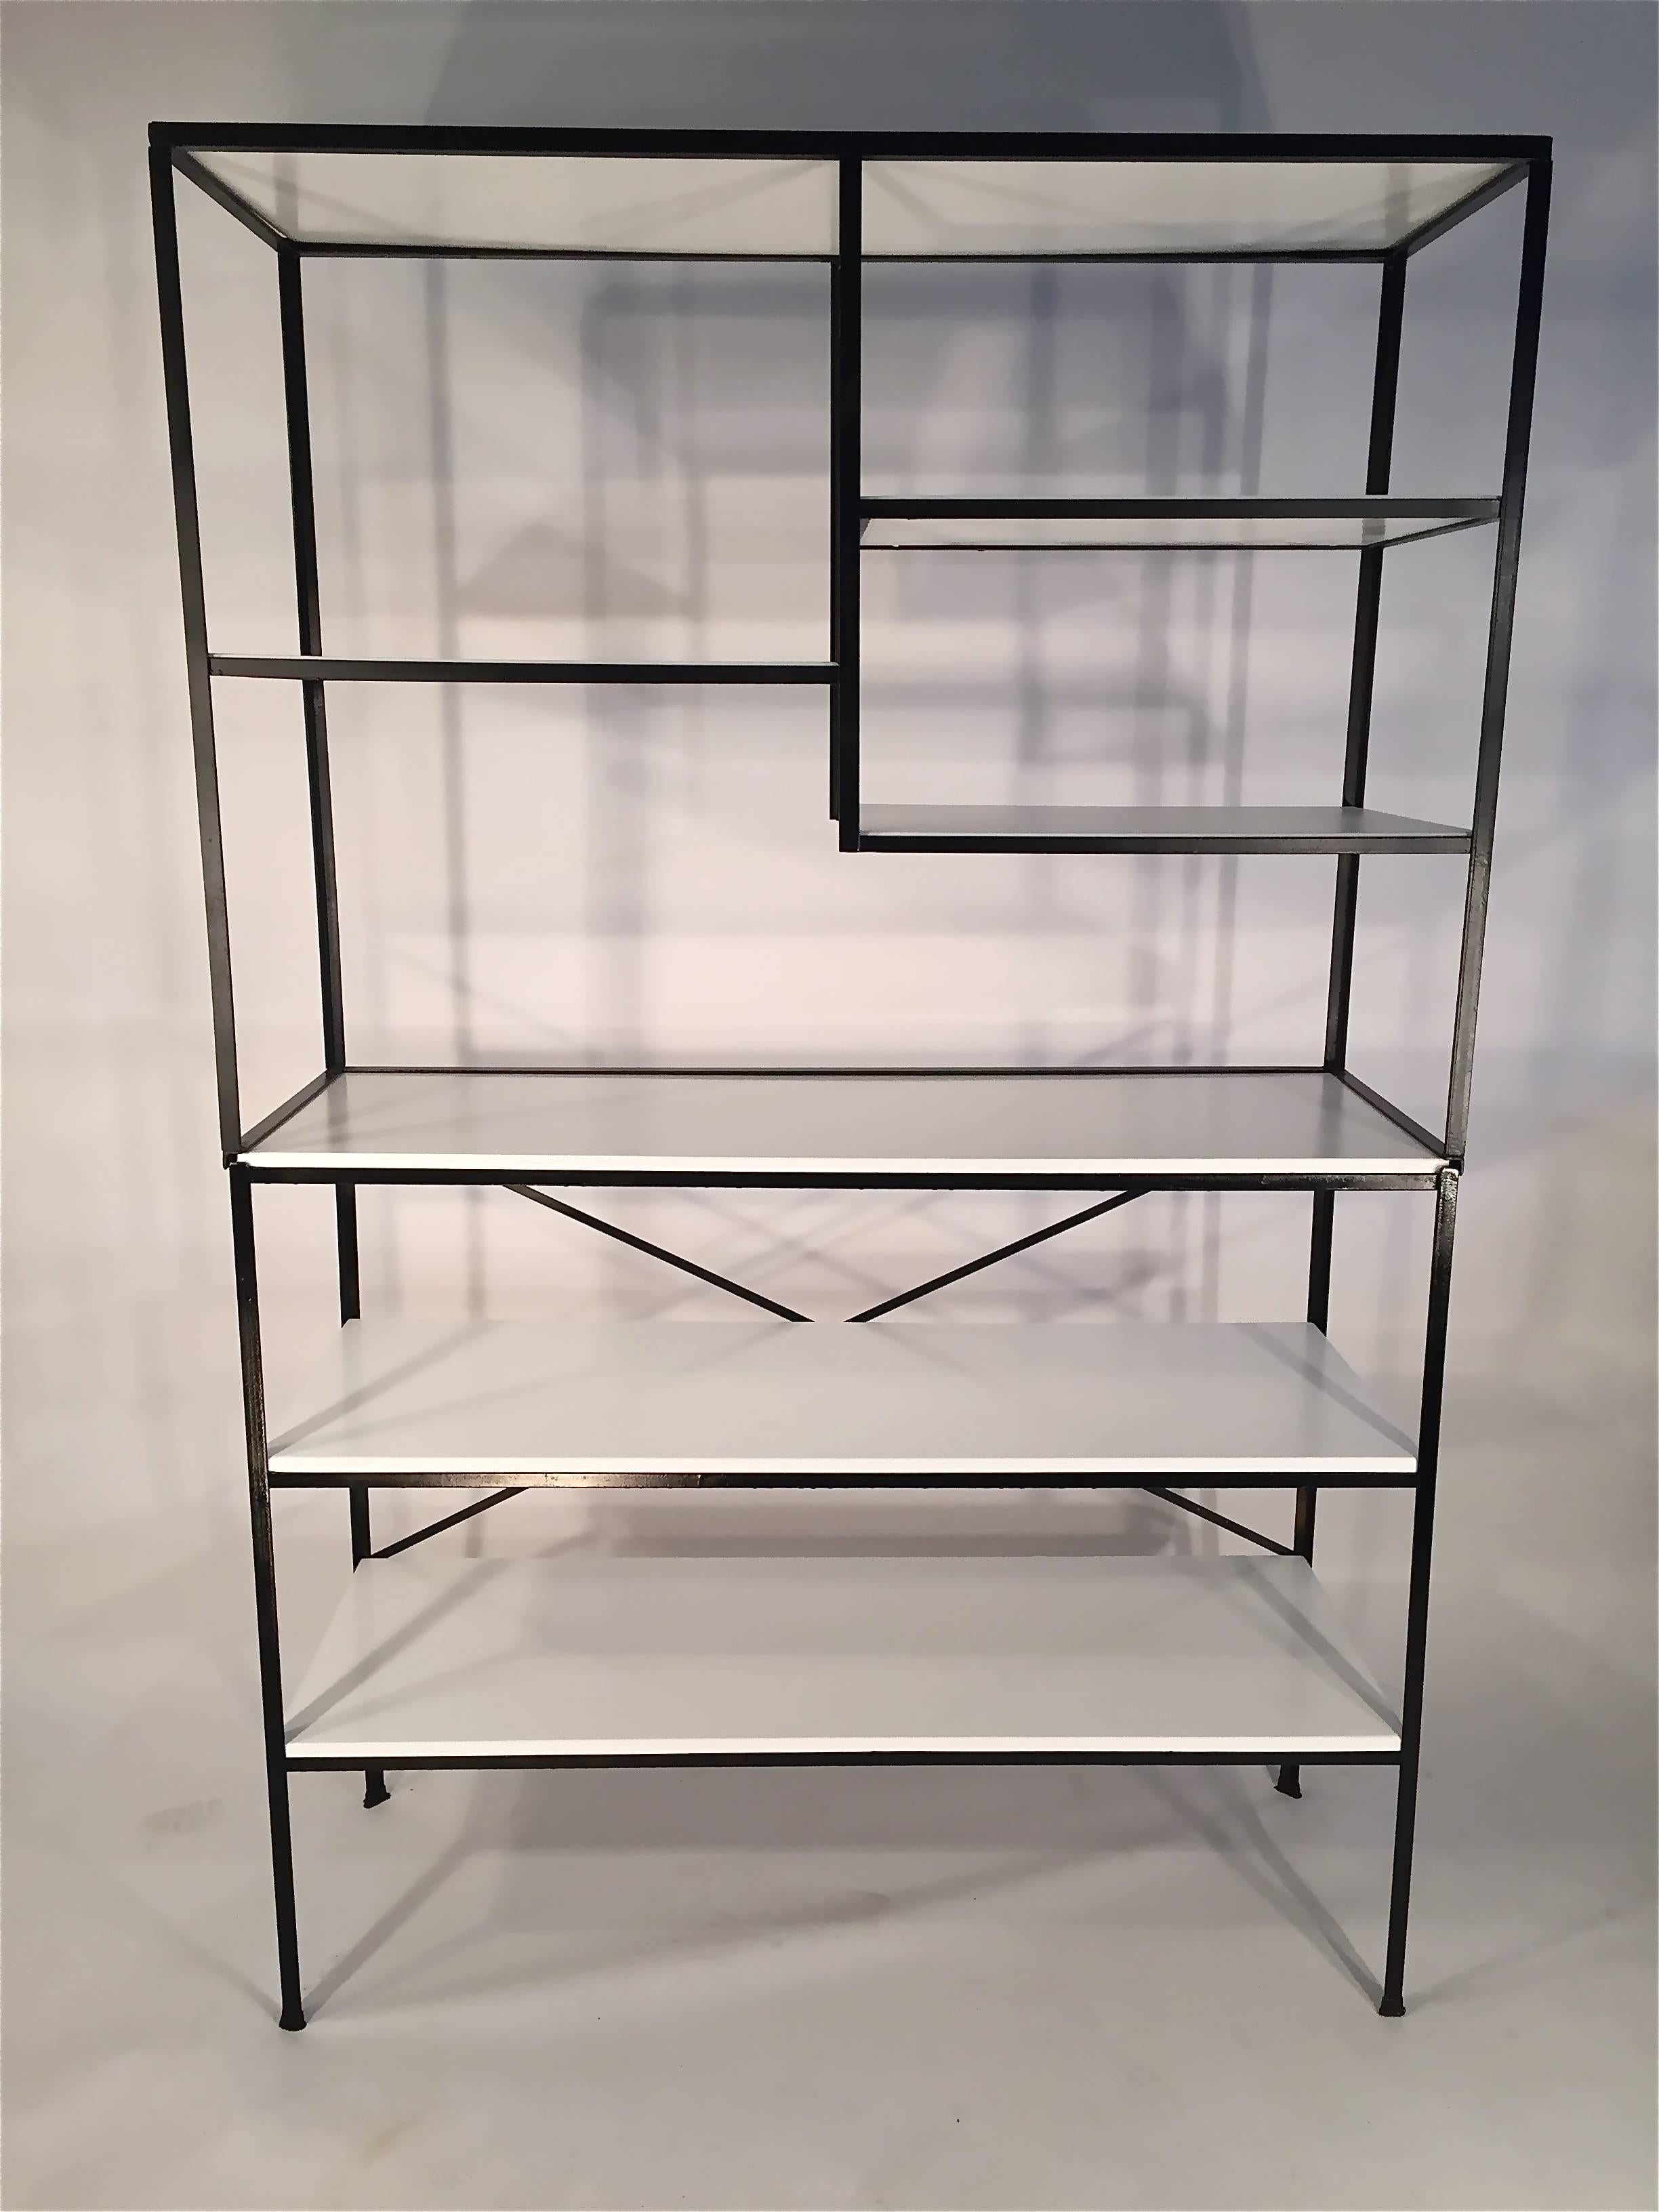 Frederick Weinberg iron and Masonite shelf unit from the 1950s. This is restored with black lacquer on the iron frame and bright white lacquer on the Masonite shelves. The iron frame of this unit is in two pieces with the top half being able to lift